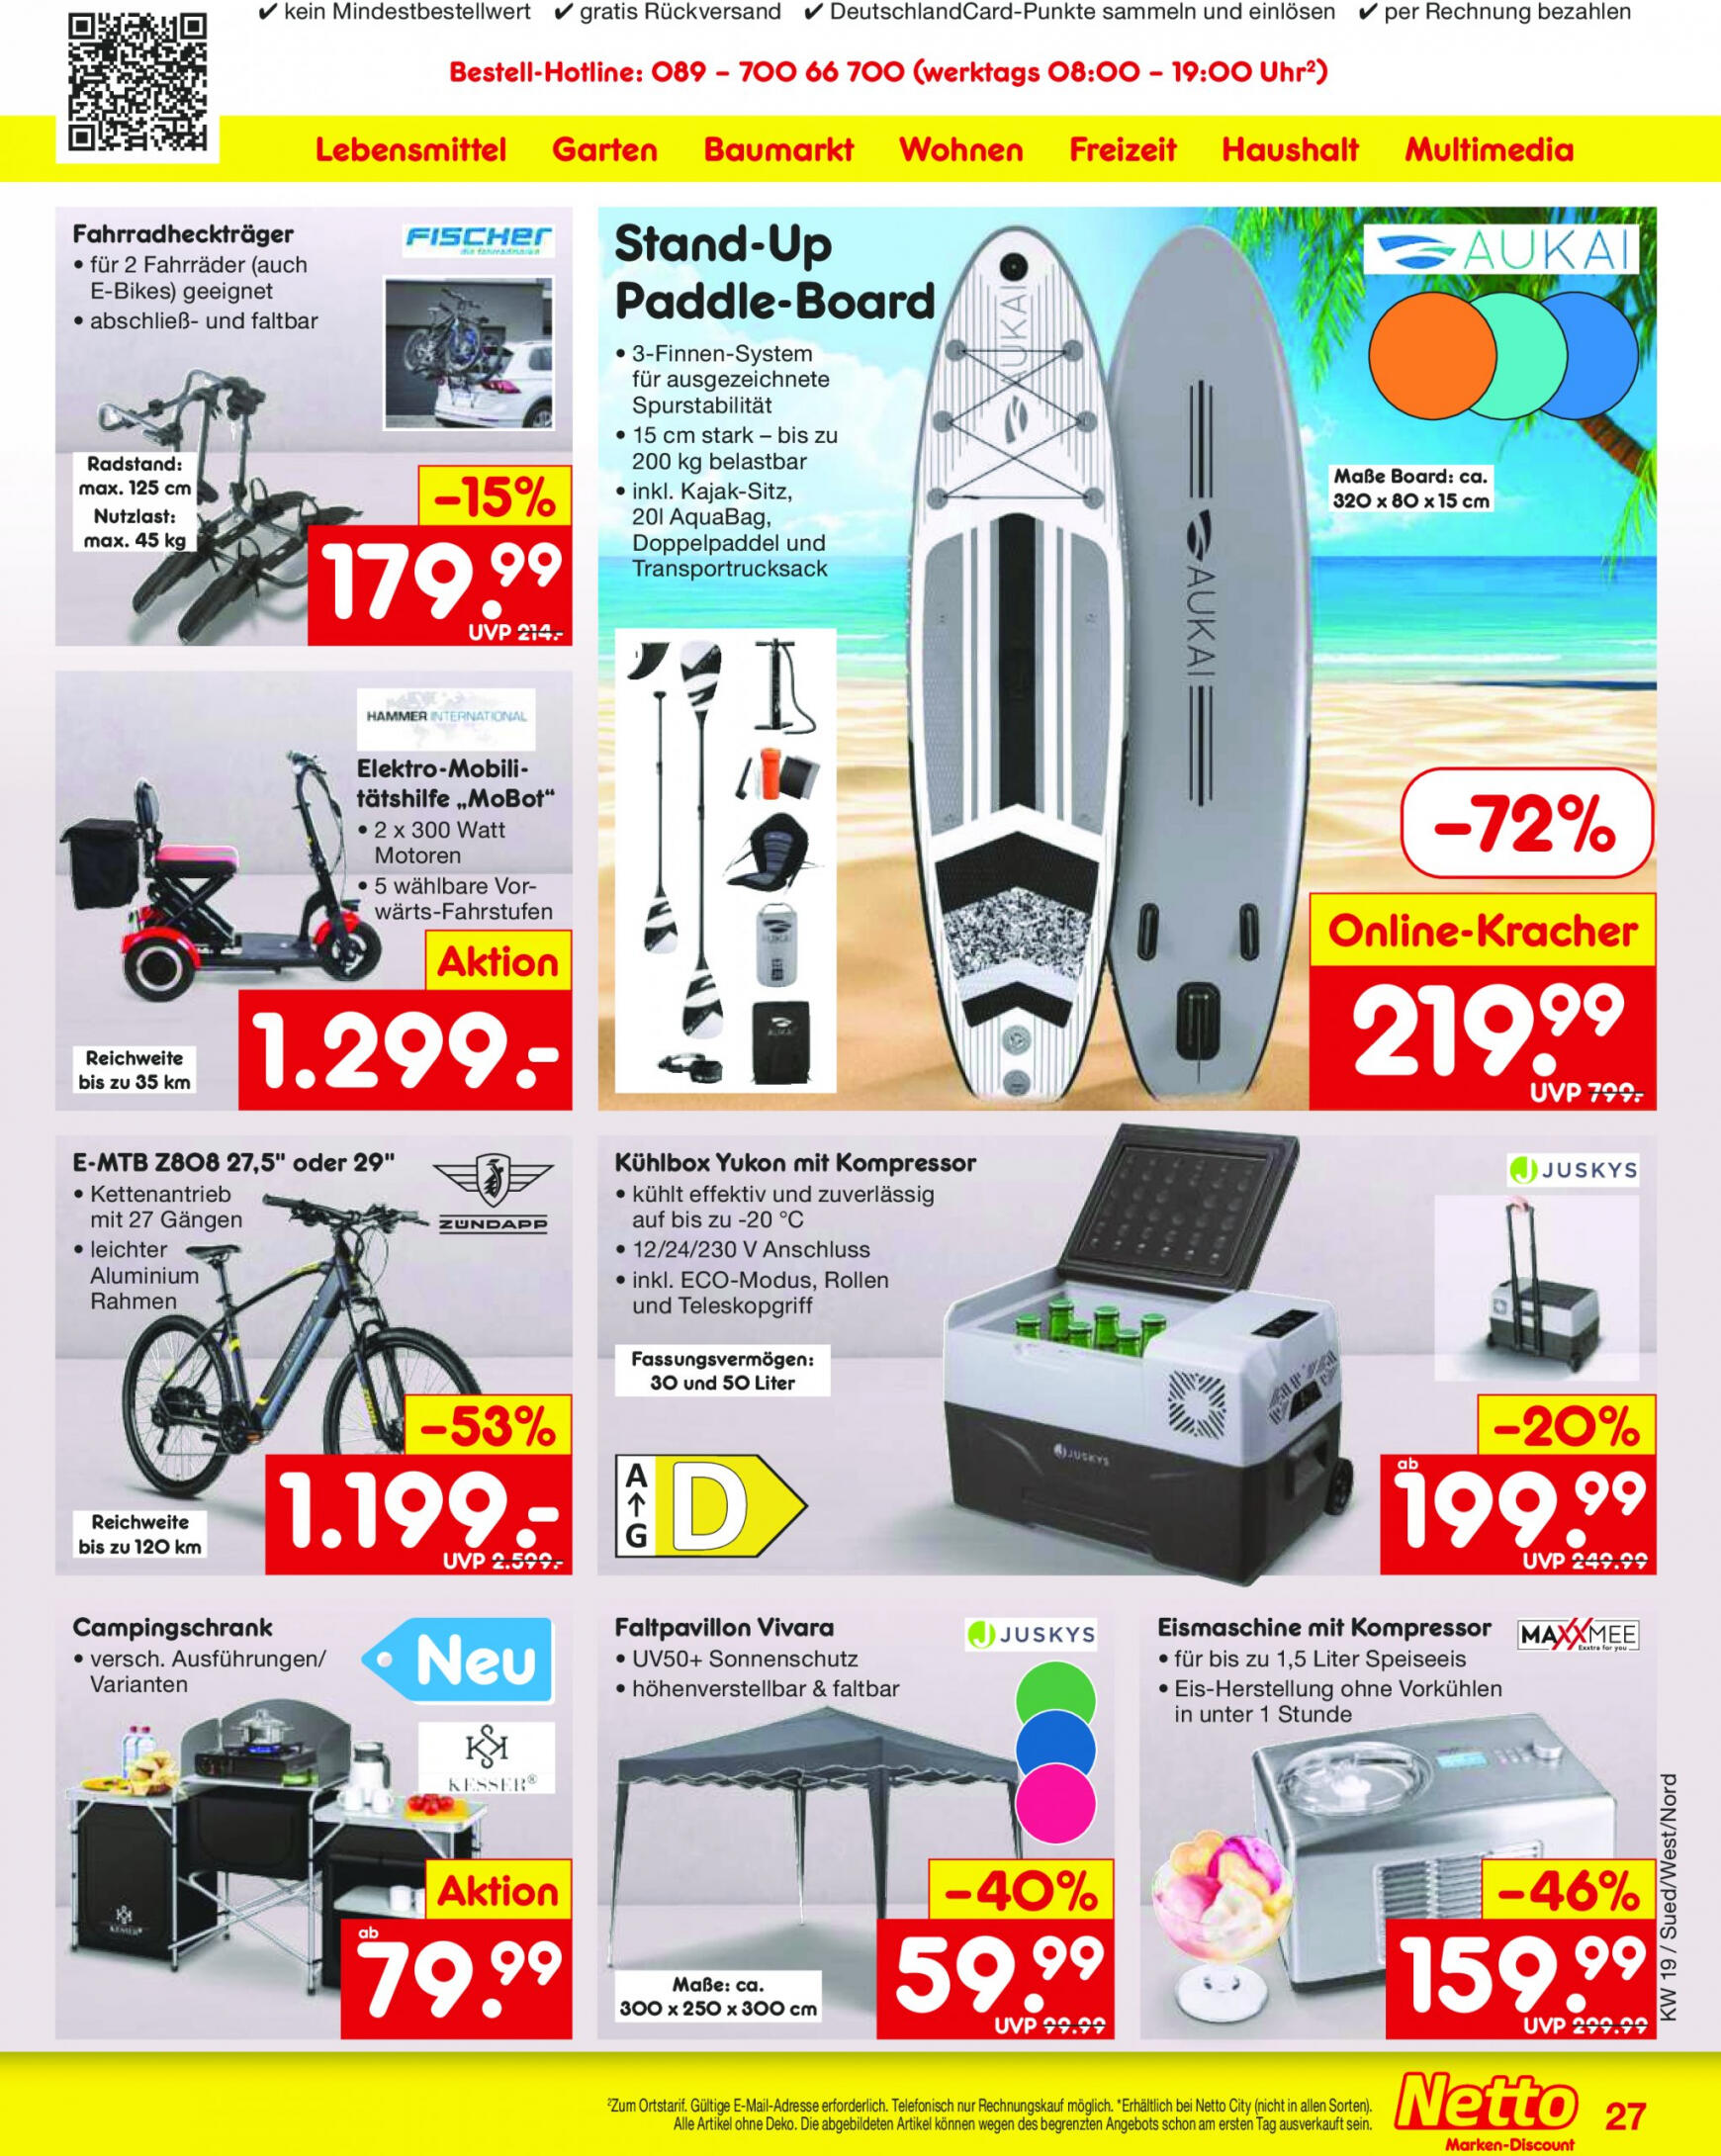 netto - Flyer Netto aktuell 06.05. - 11.05. - page: 35